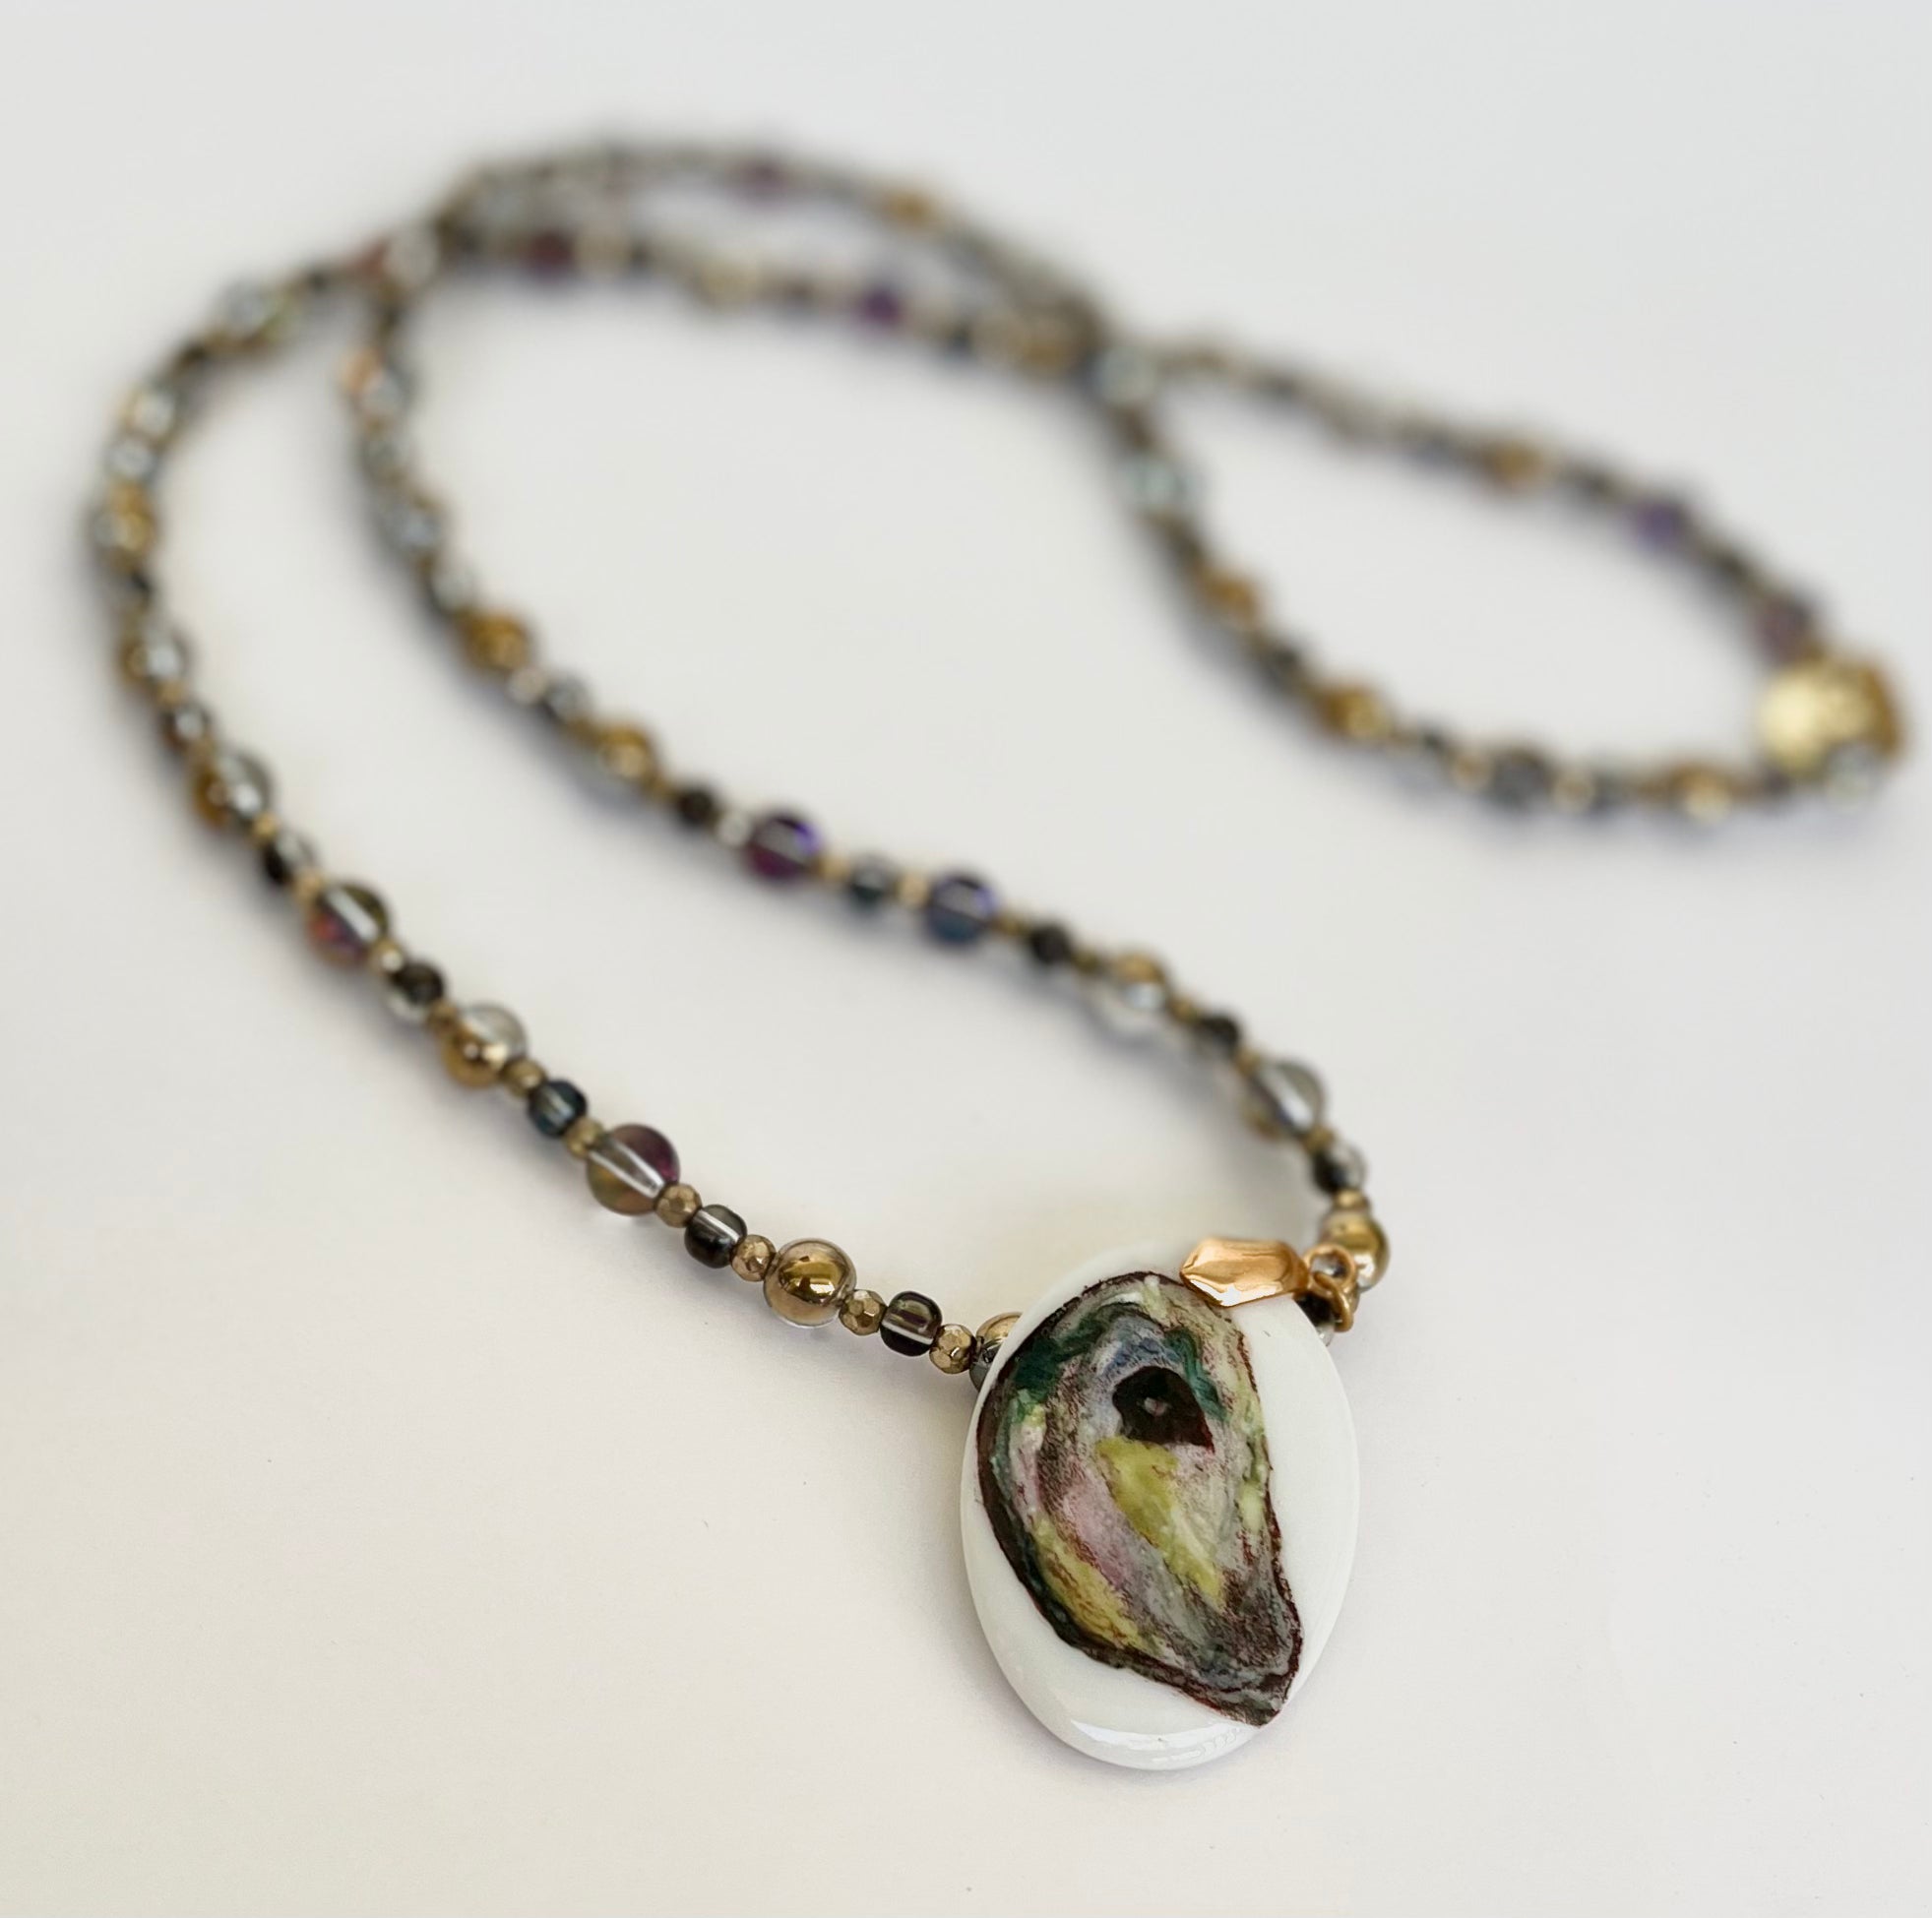 A gift for mom, Oyster Shell Necklace